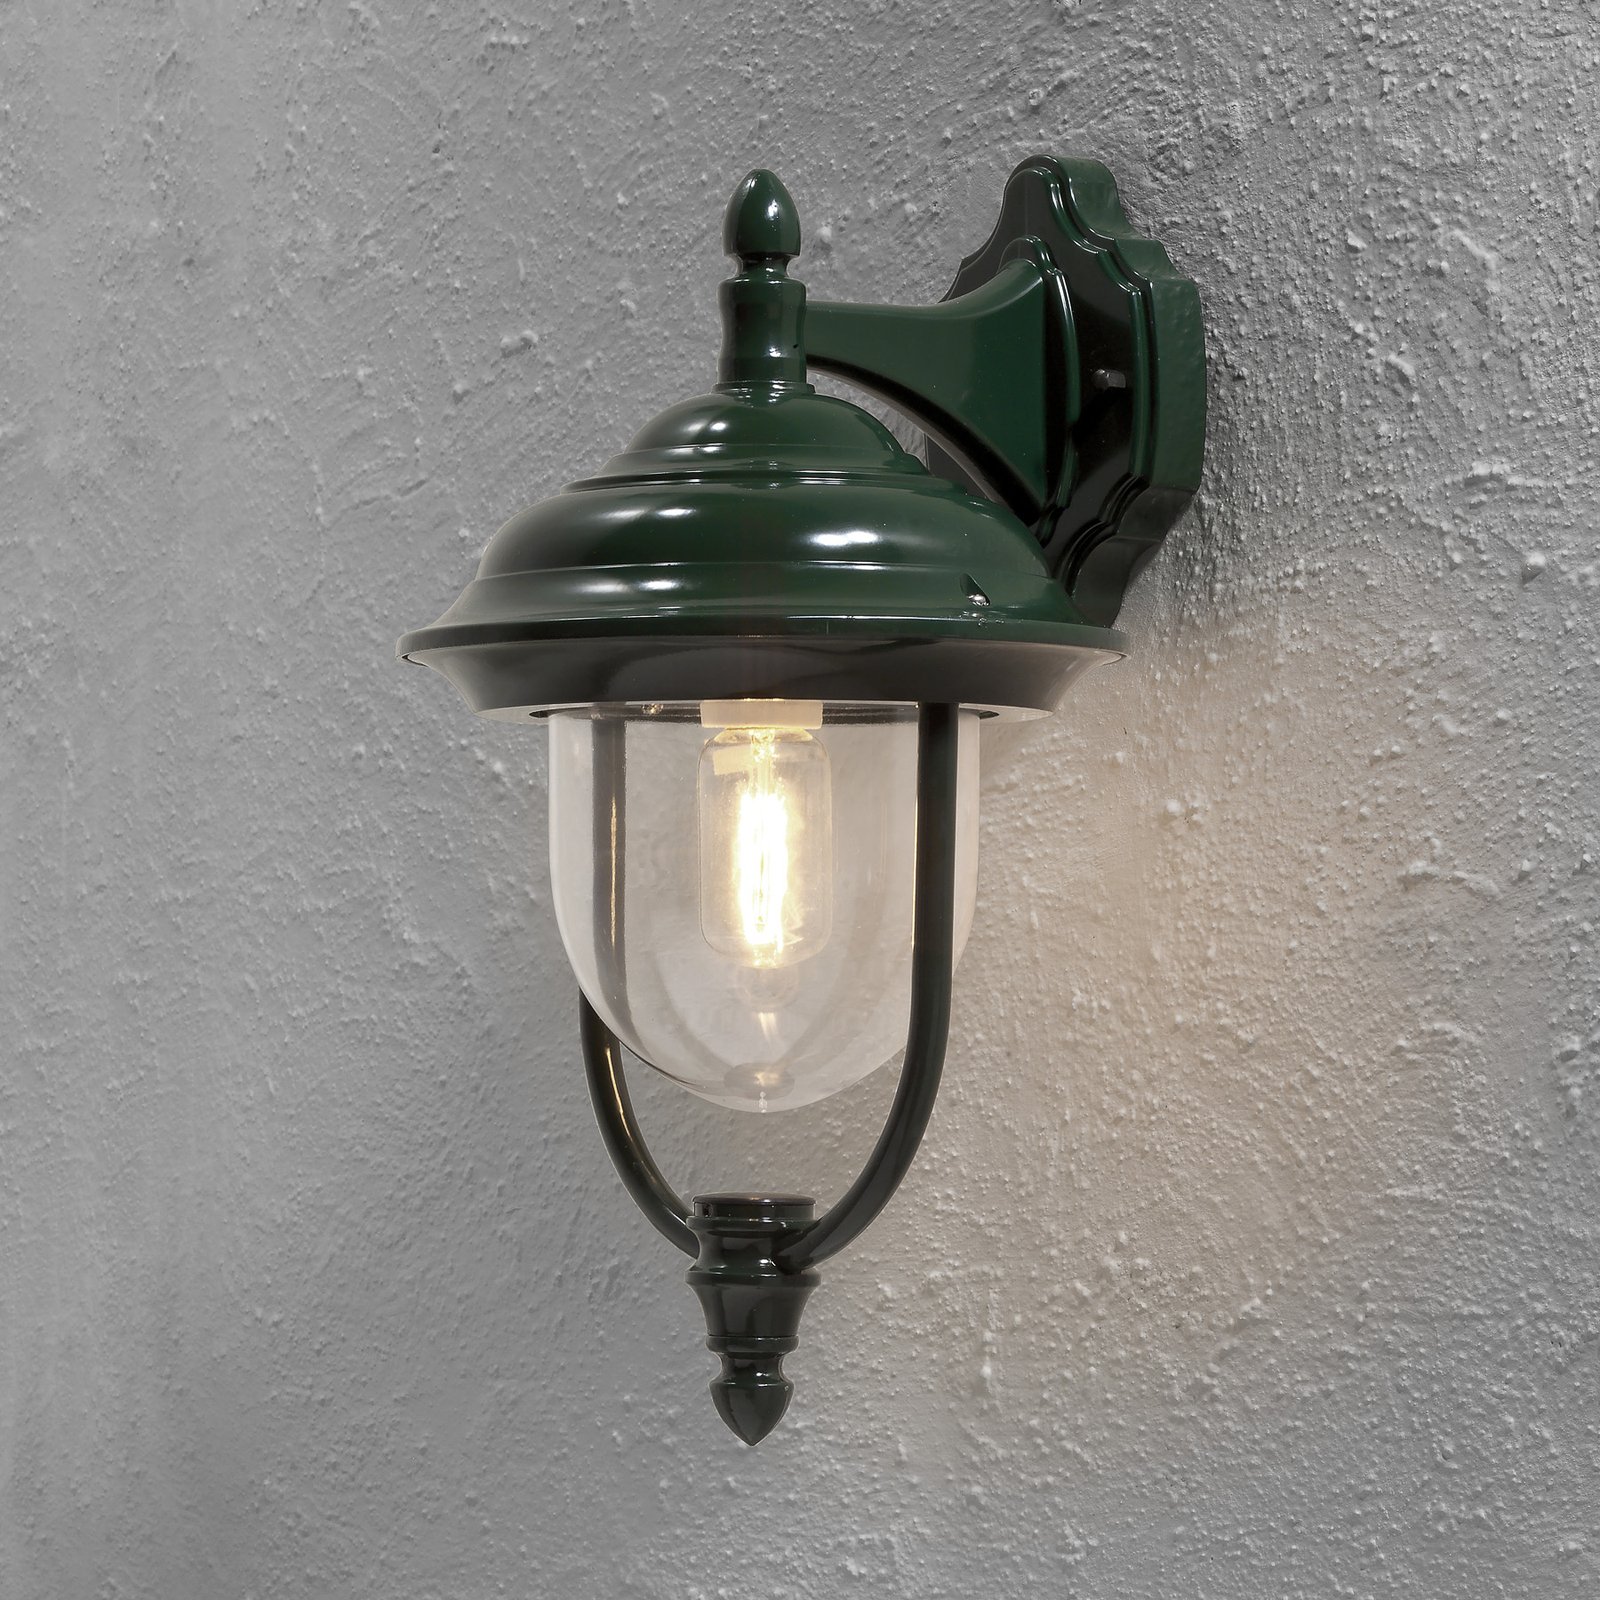 Parma outdoor wall light, hanging lantern in green